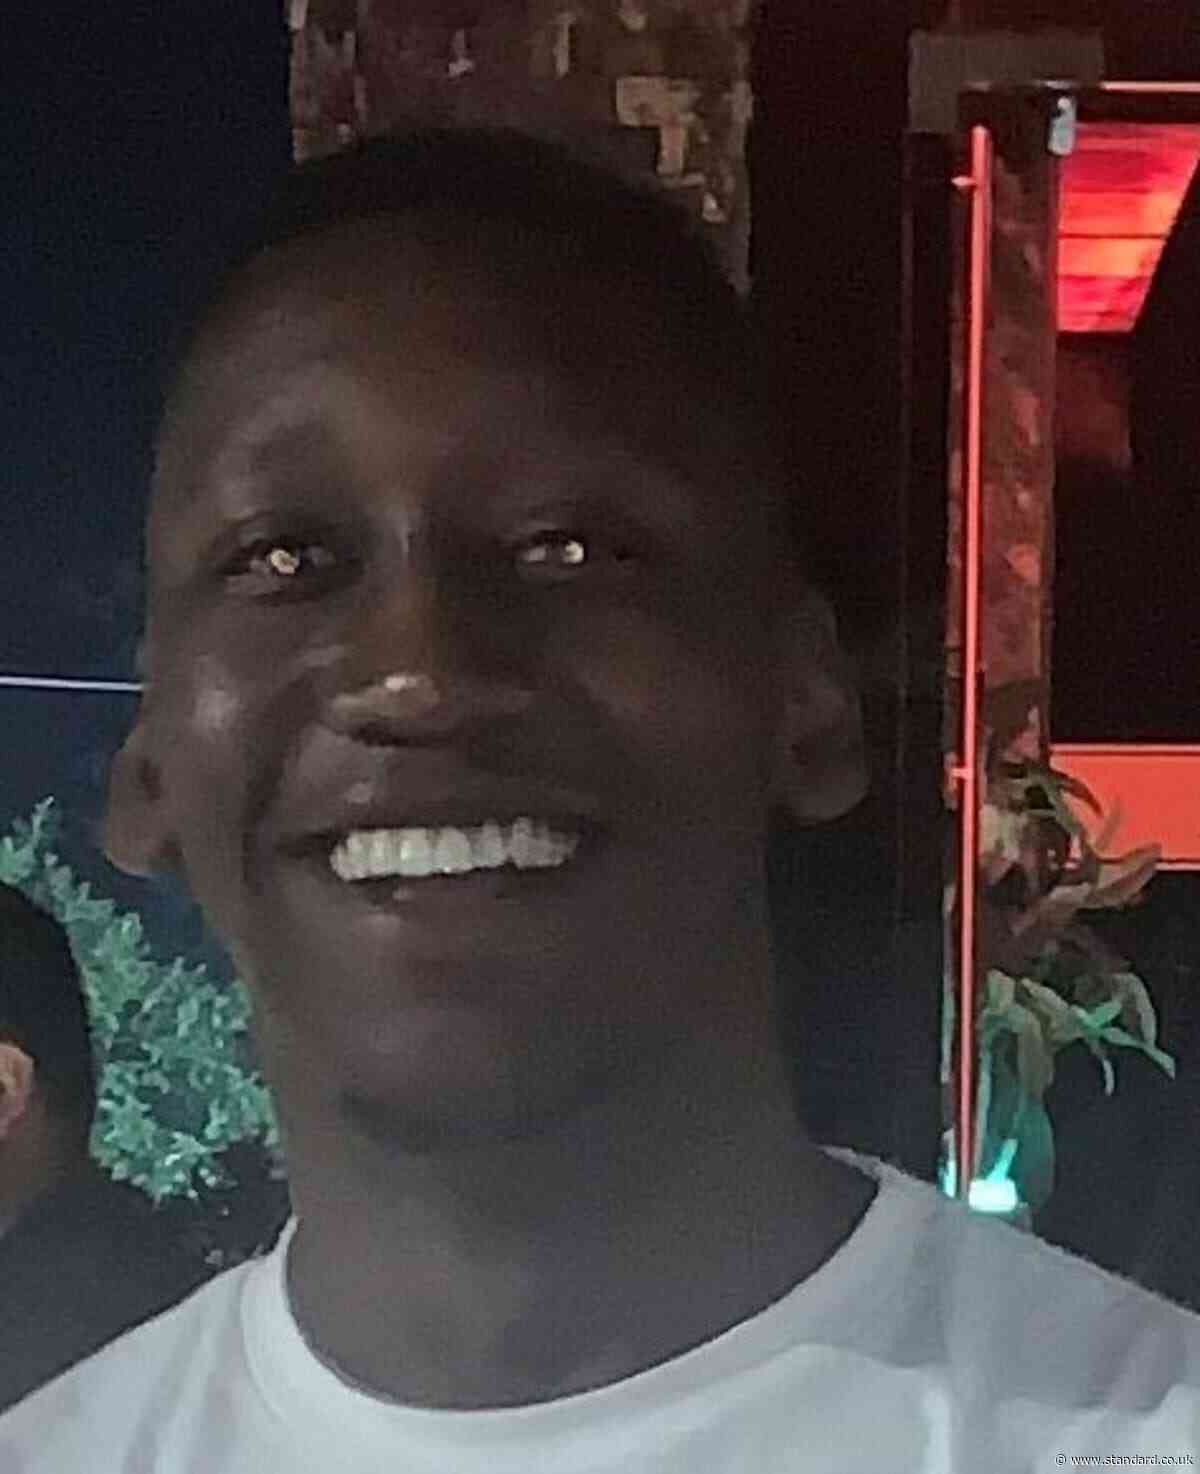 Givani Espuet: Seven jailed over 'senseless killing' of man stabbed 11 times at party in west London